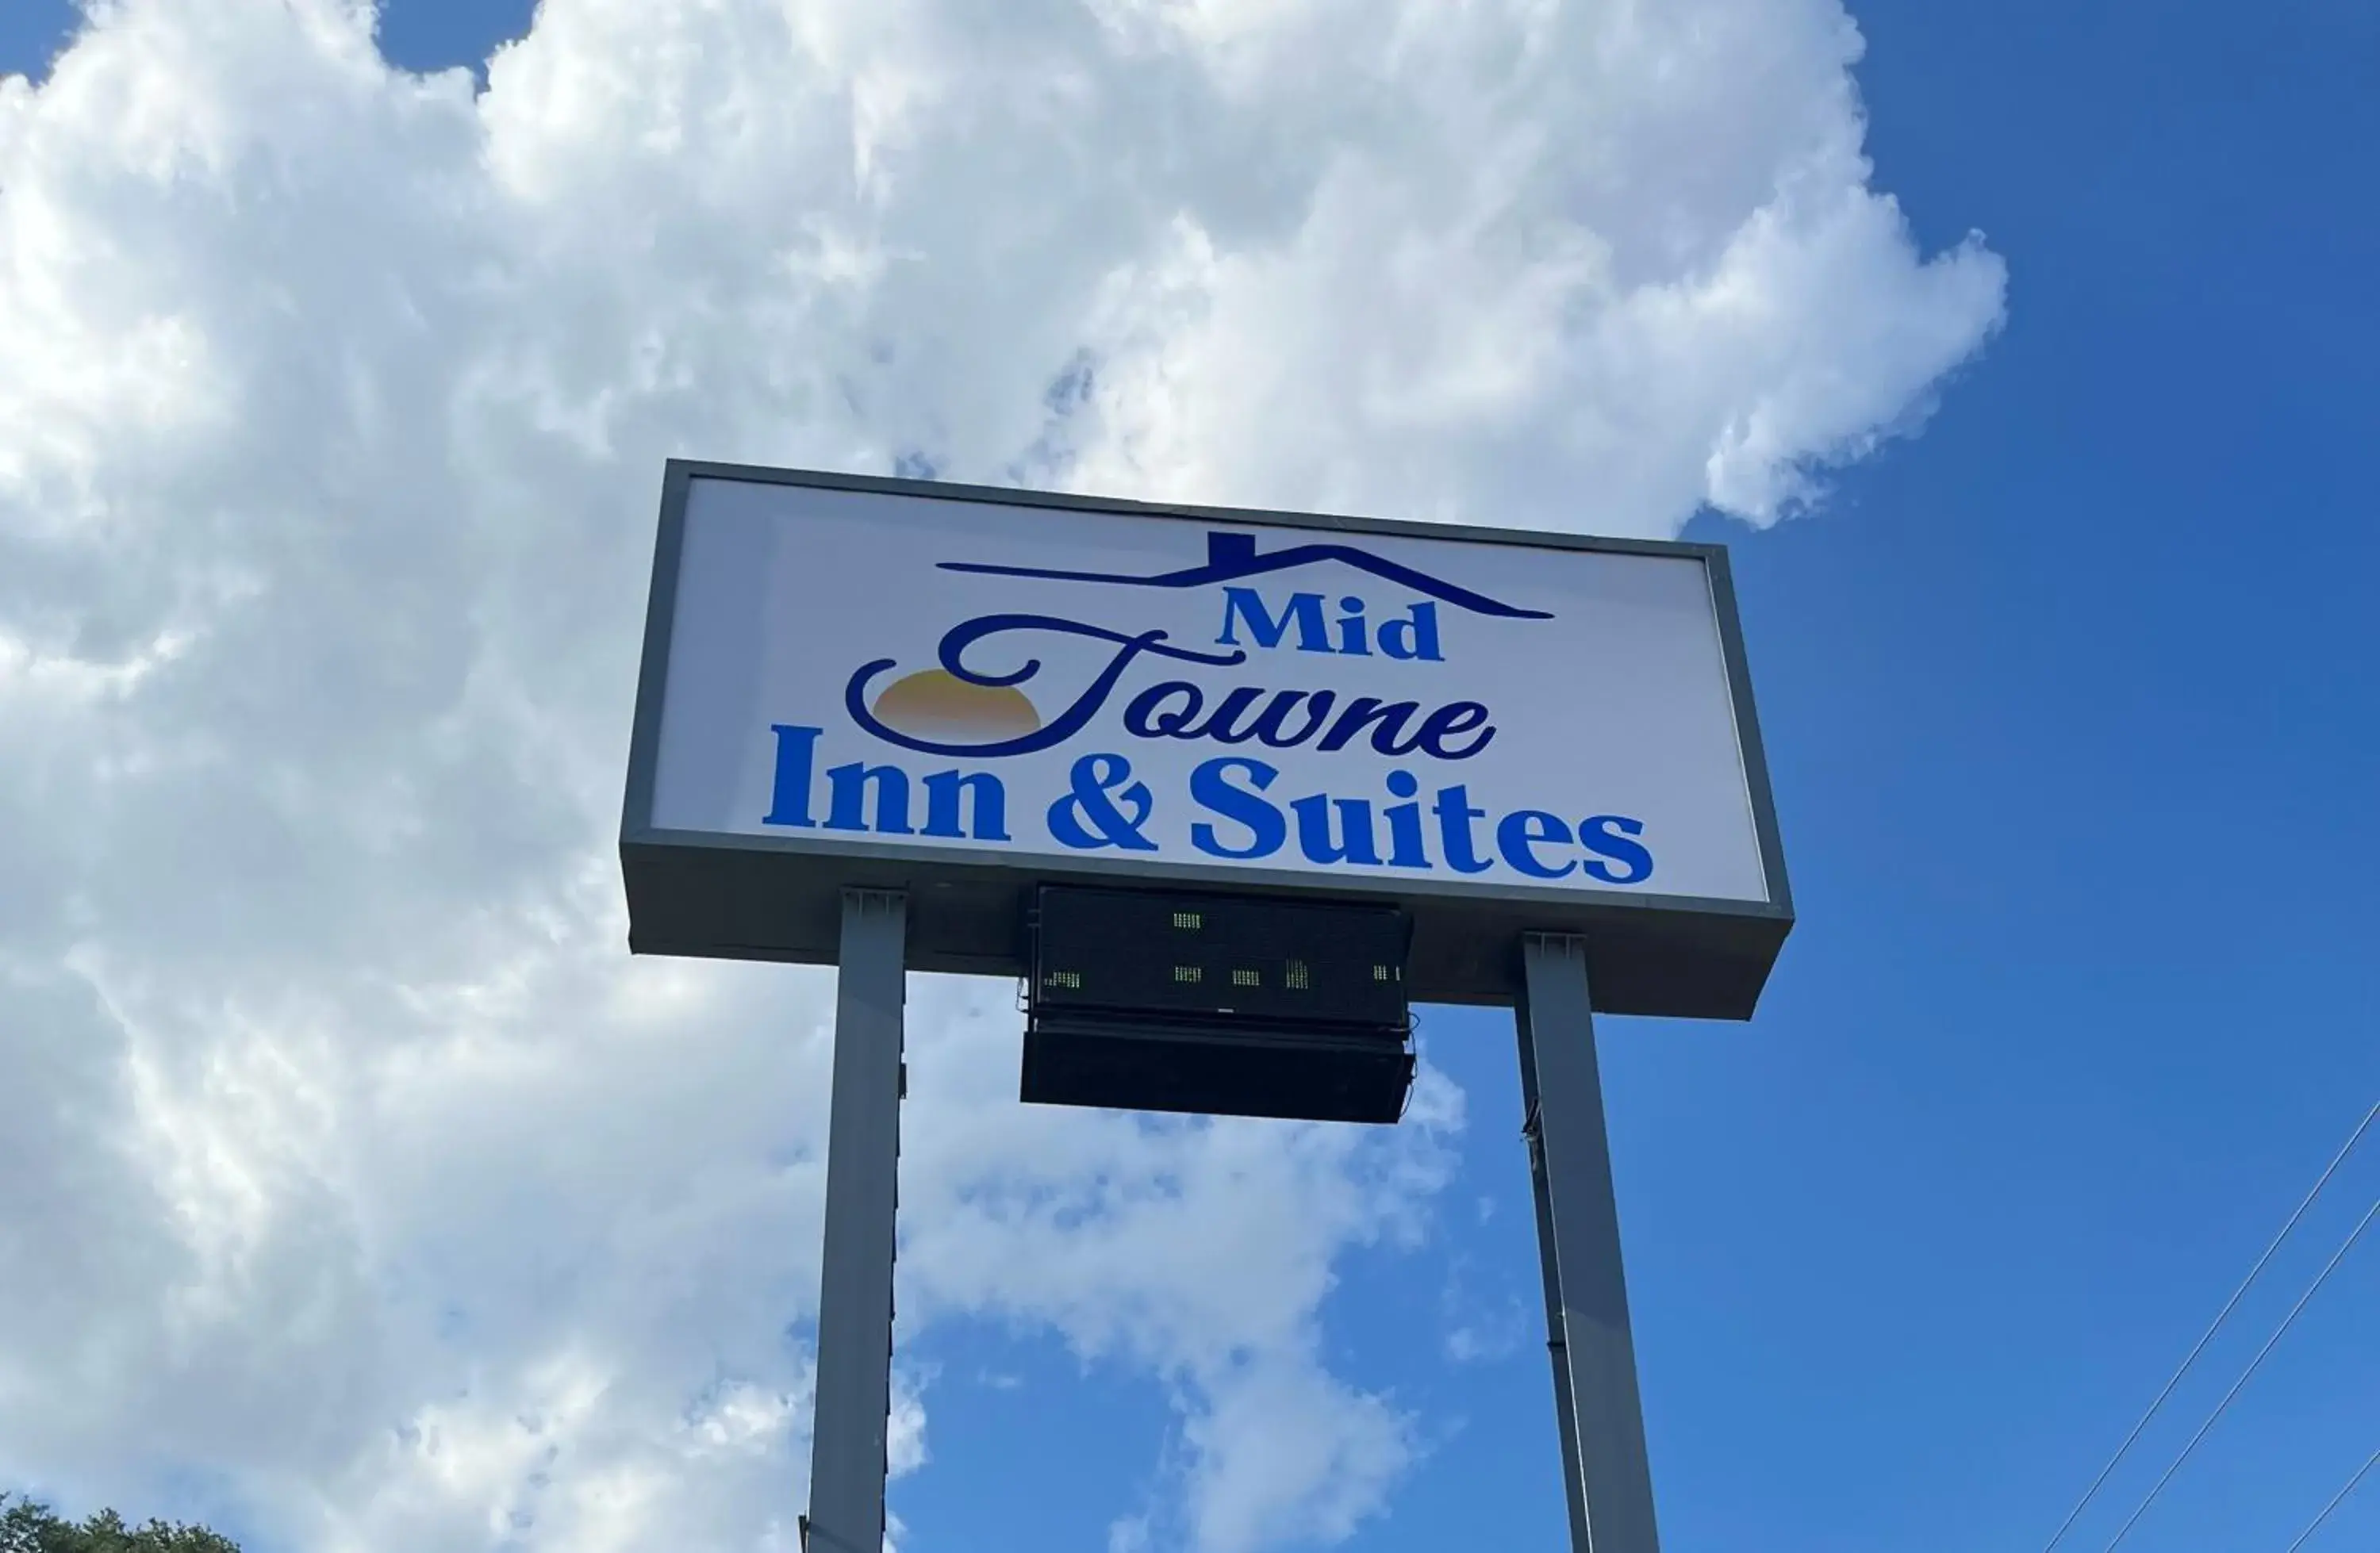 Property logo or sign in Mid Towne Inn & Suites